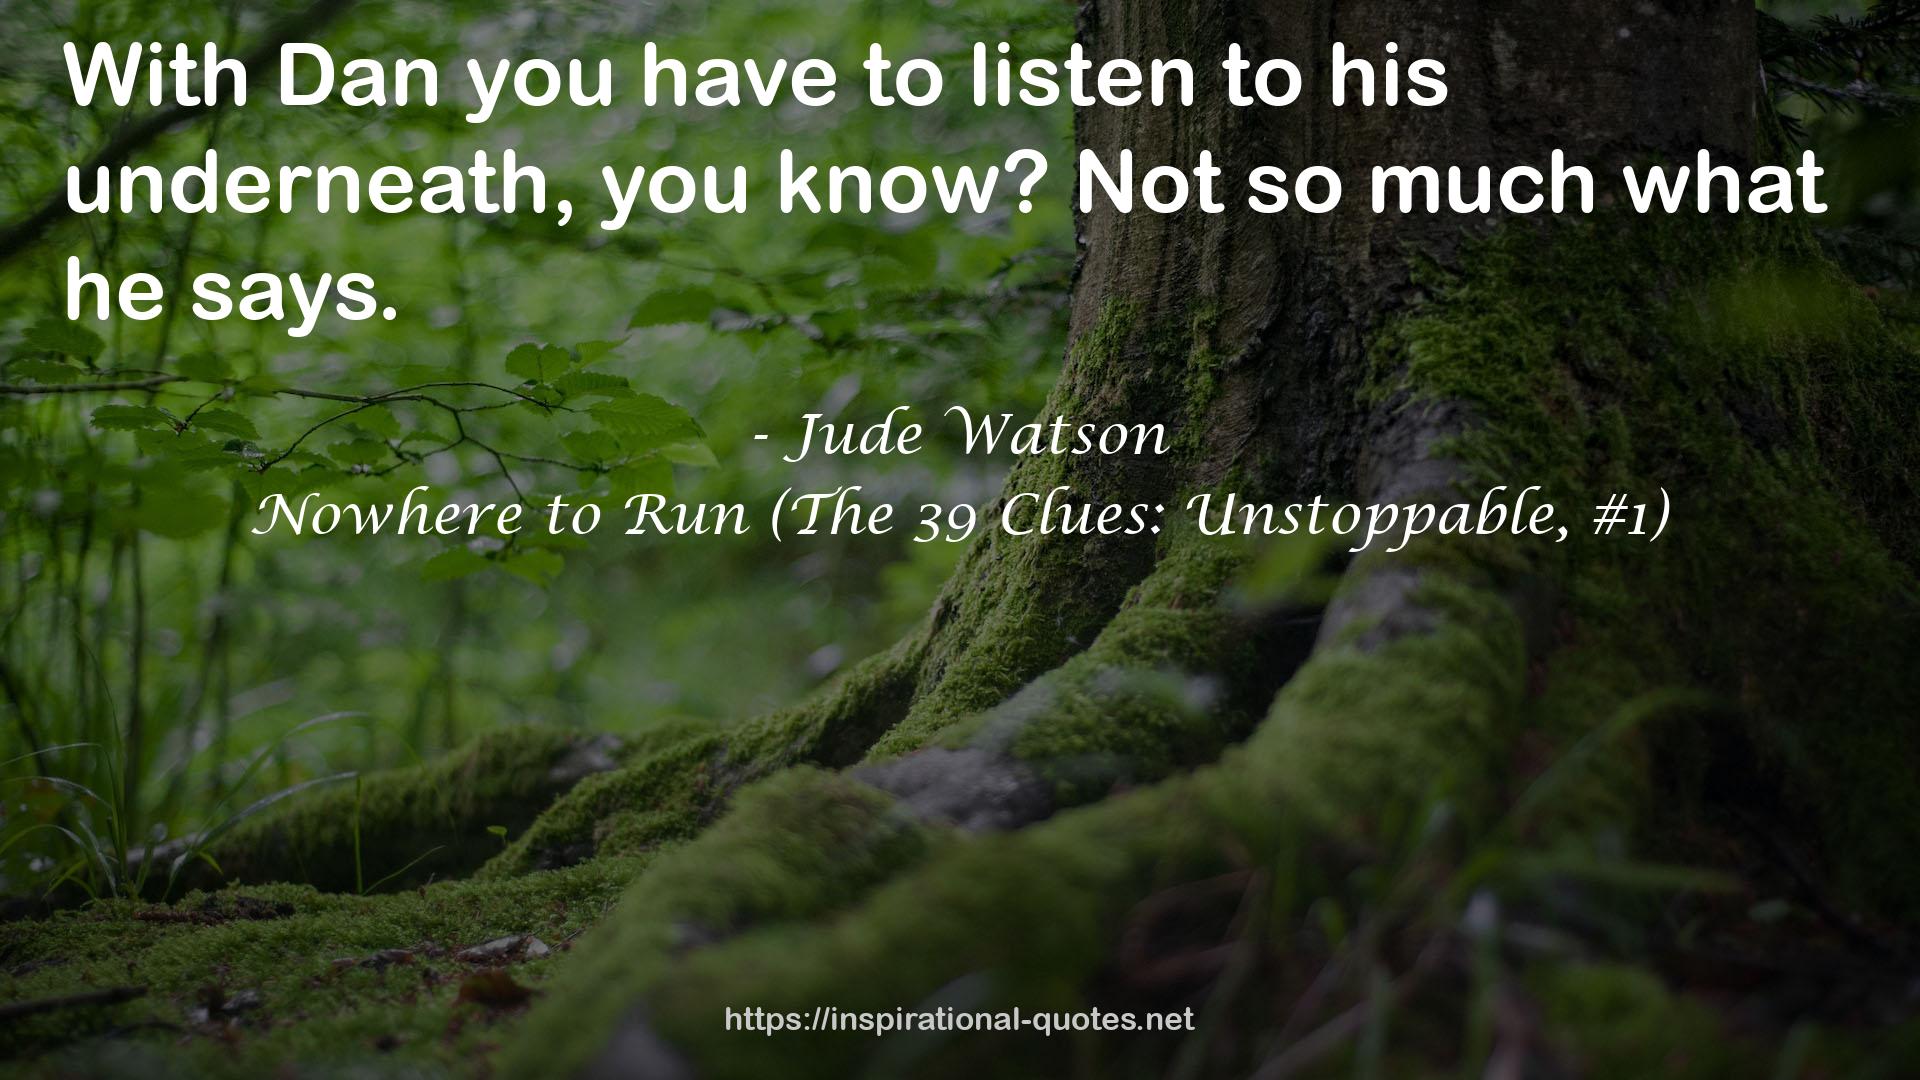 Nowhere to Run (The 39 Clues: Unstoppable, #1) QUOTES